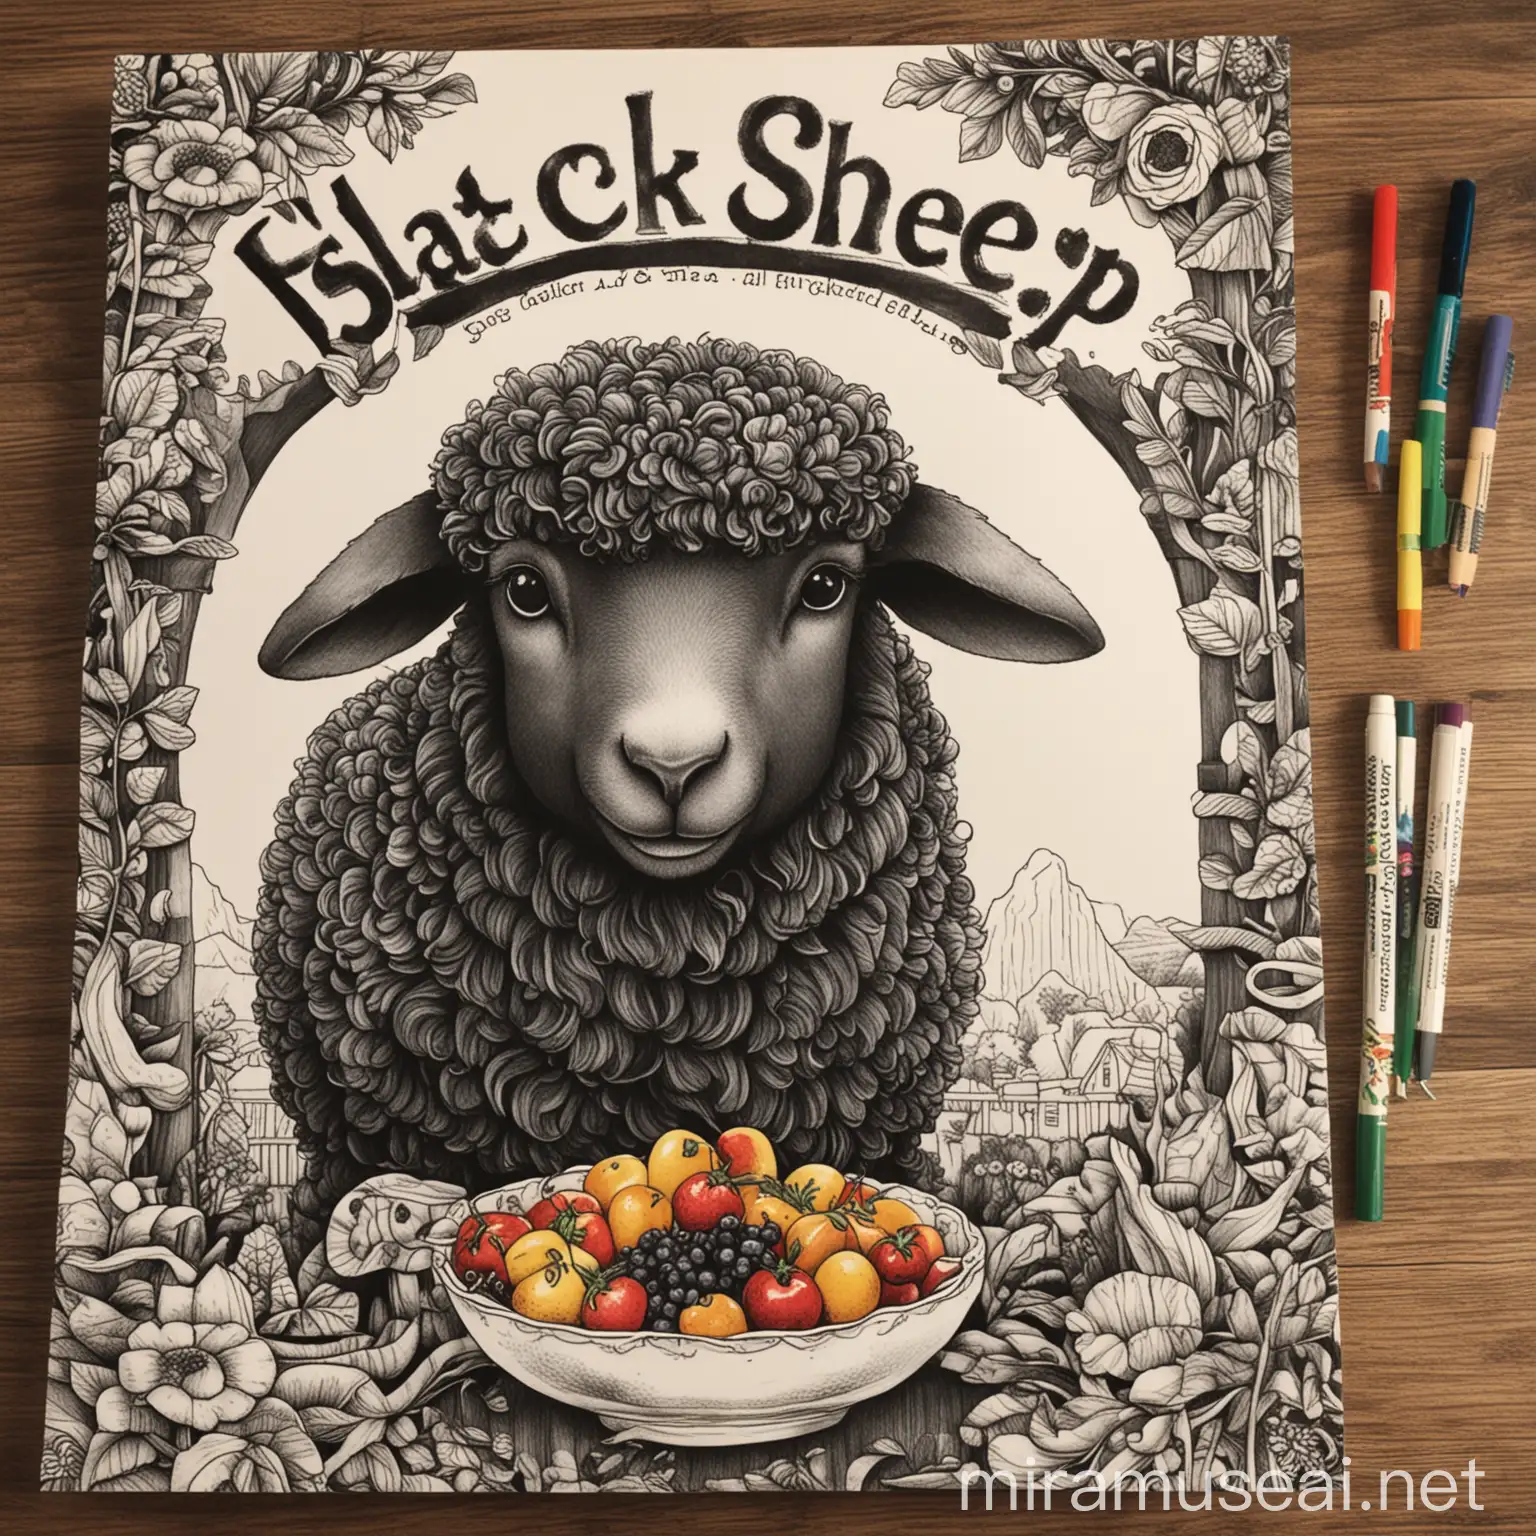 create 40 page coloring book with illustrations of how a black sheep goes through challenges with eating the proper foods but in the end finds the best healthy meals to share with her friends